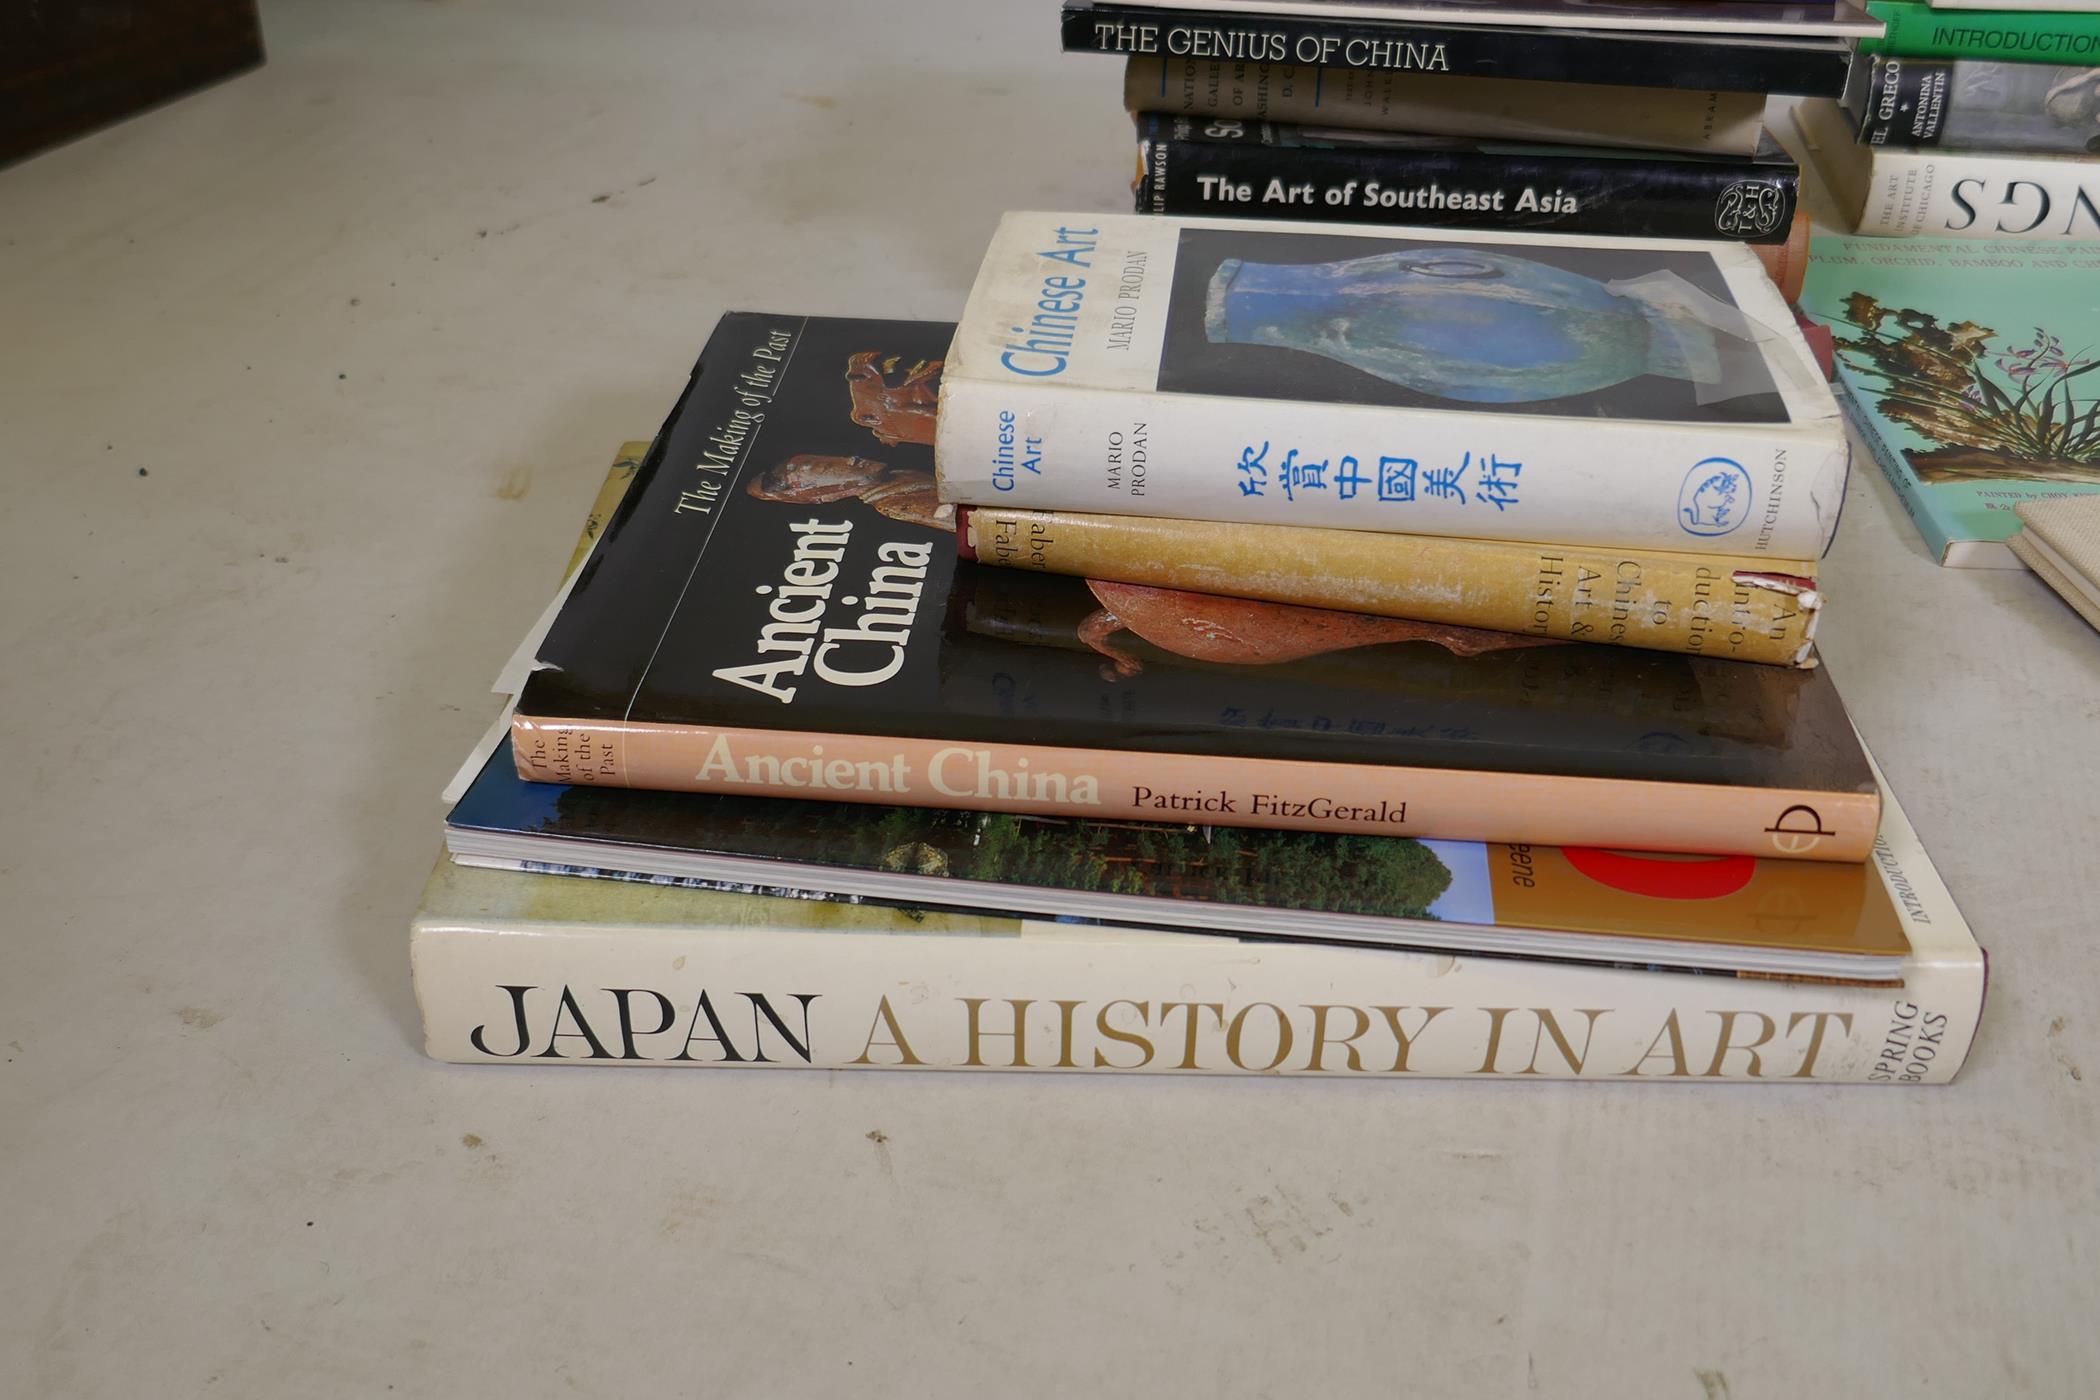 A collection of books, history of Art, China and Japan etc - Image 2 of 6